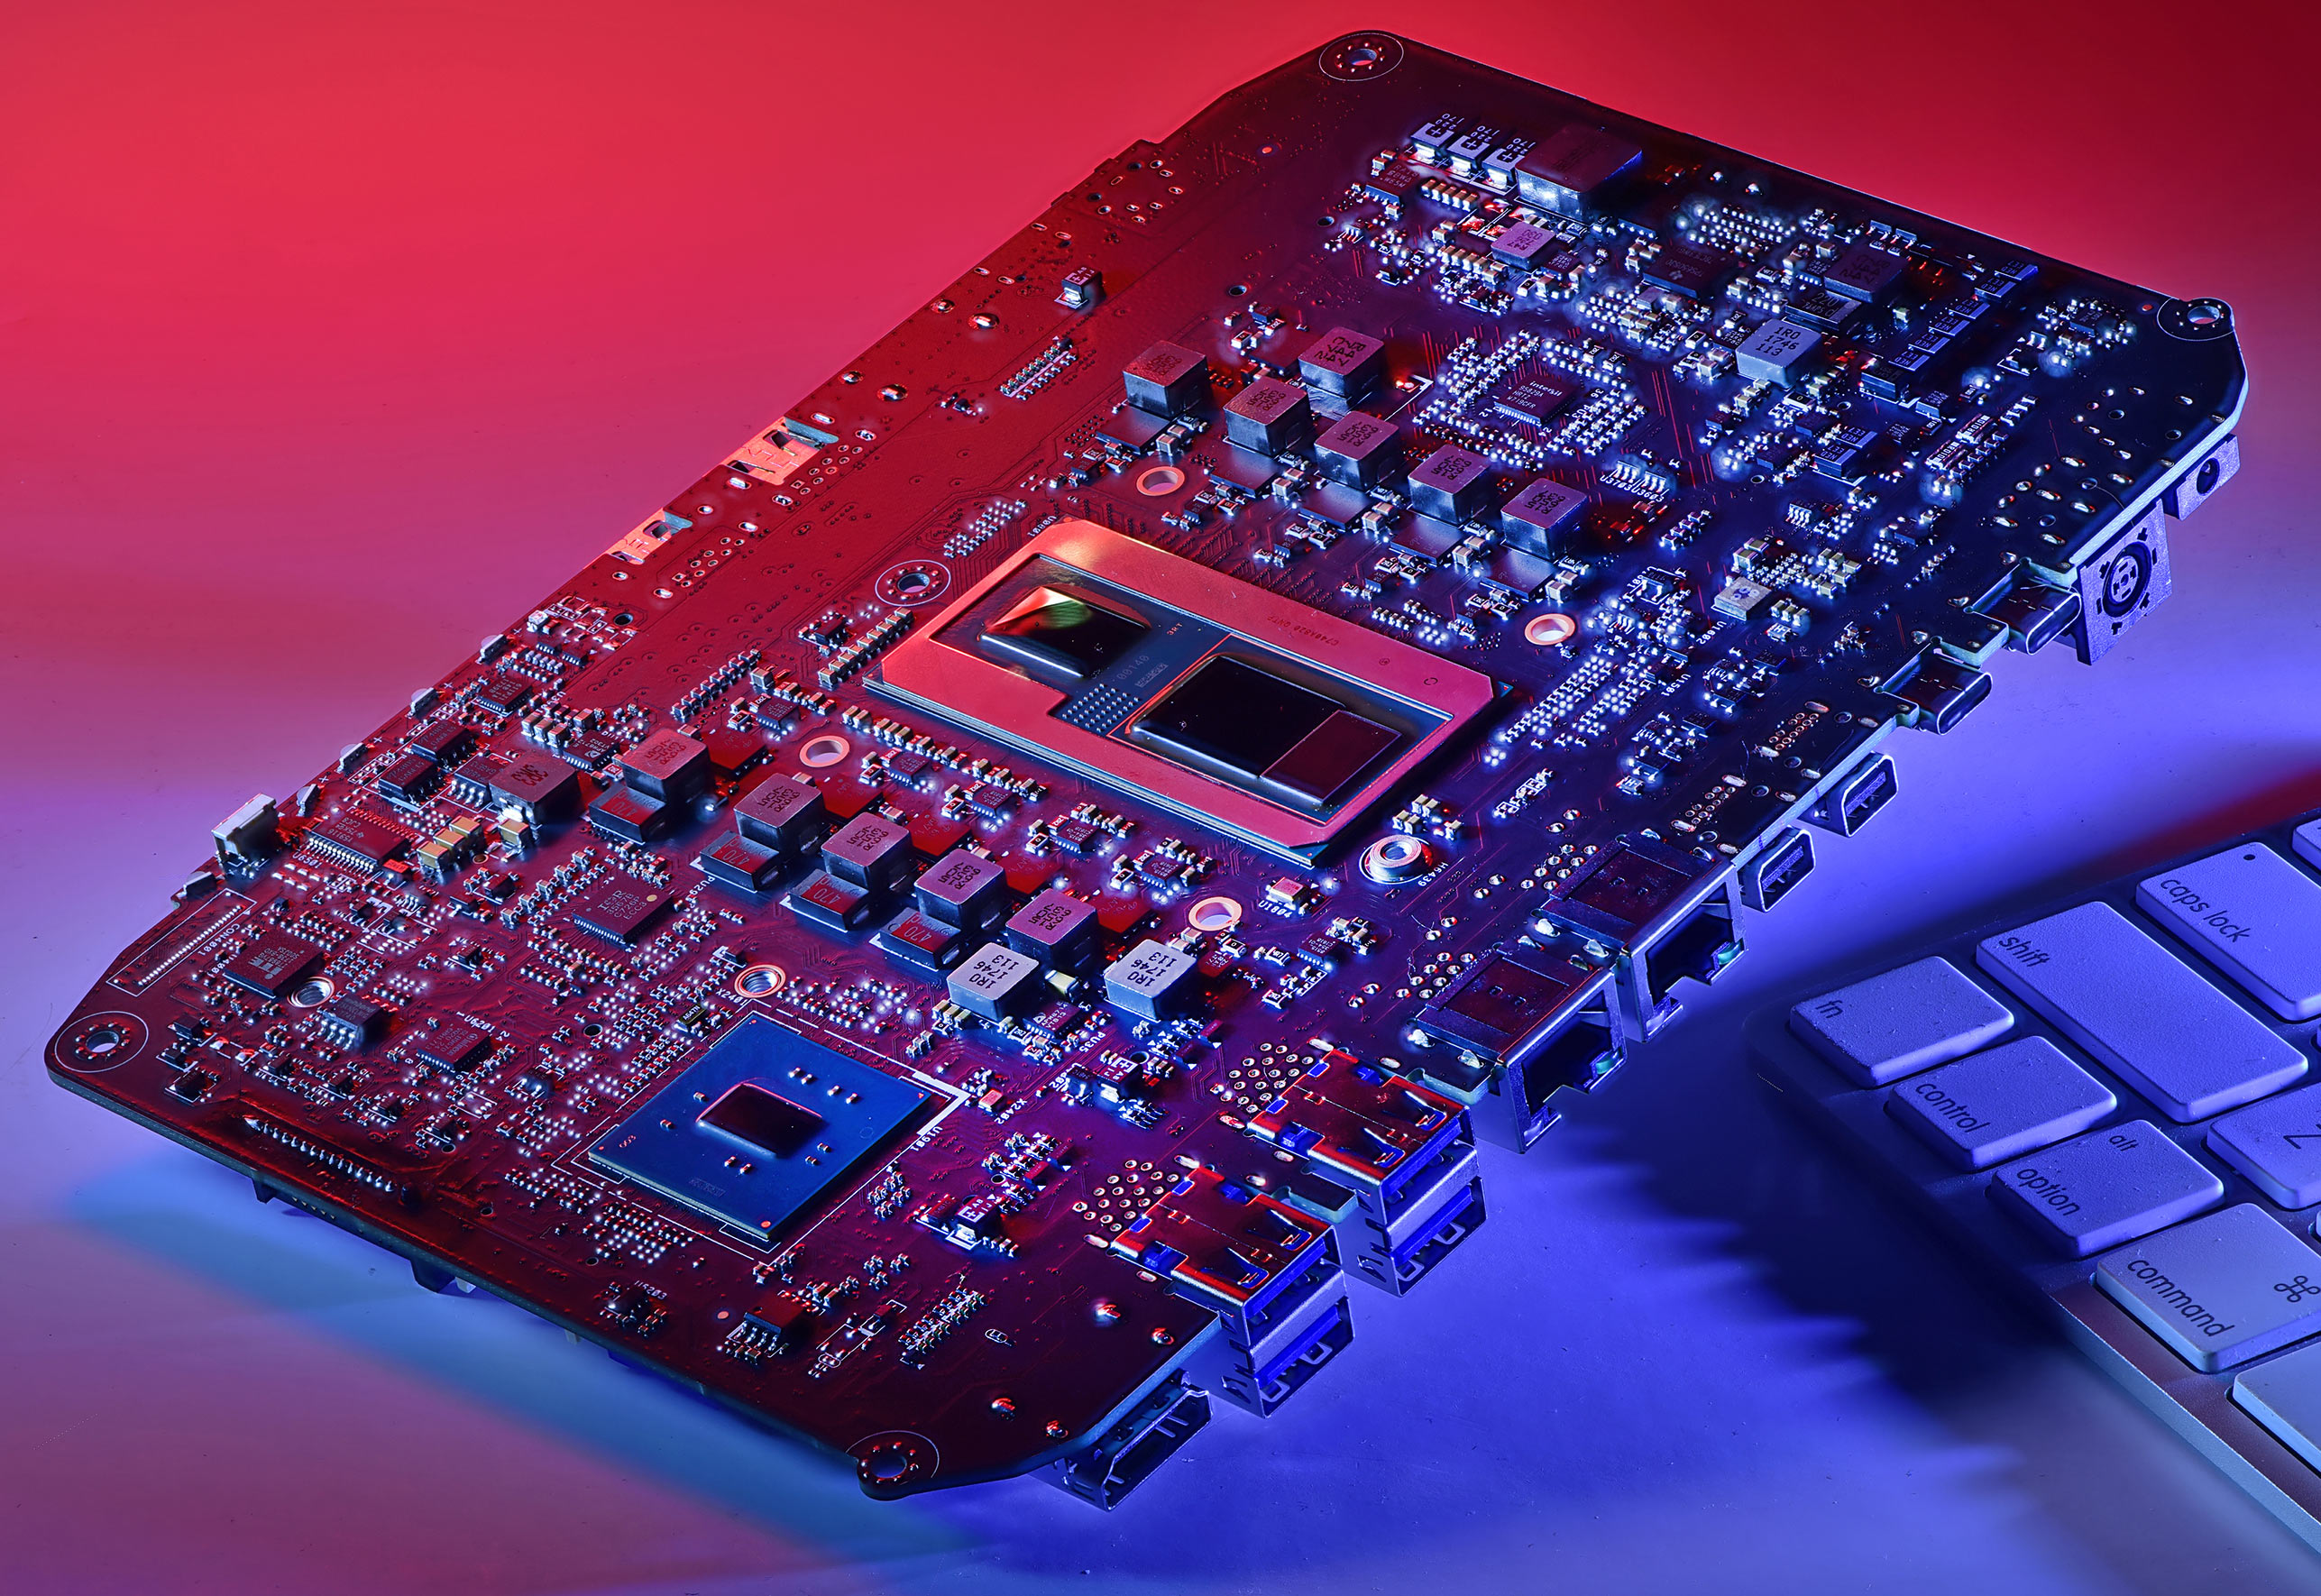 Intel shows off the Hades Canyon NUC motherboard - Mainboard